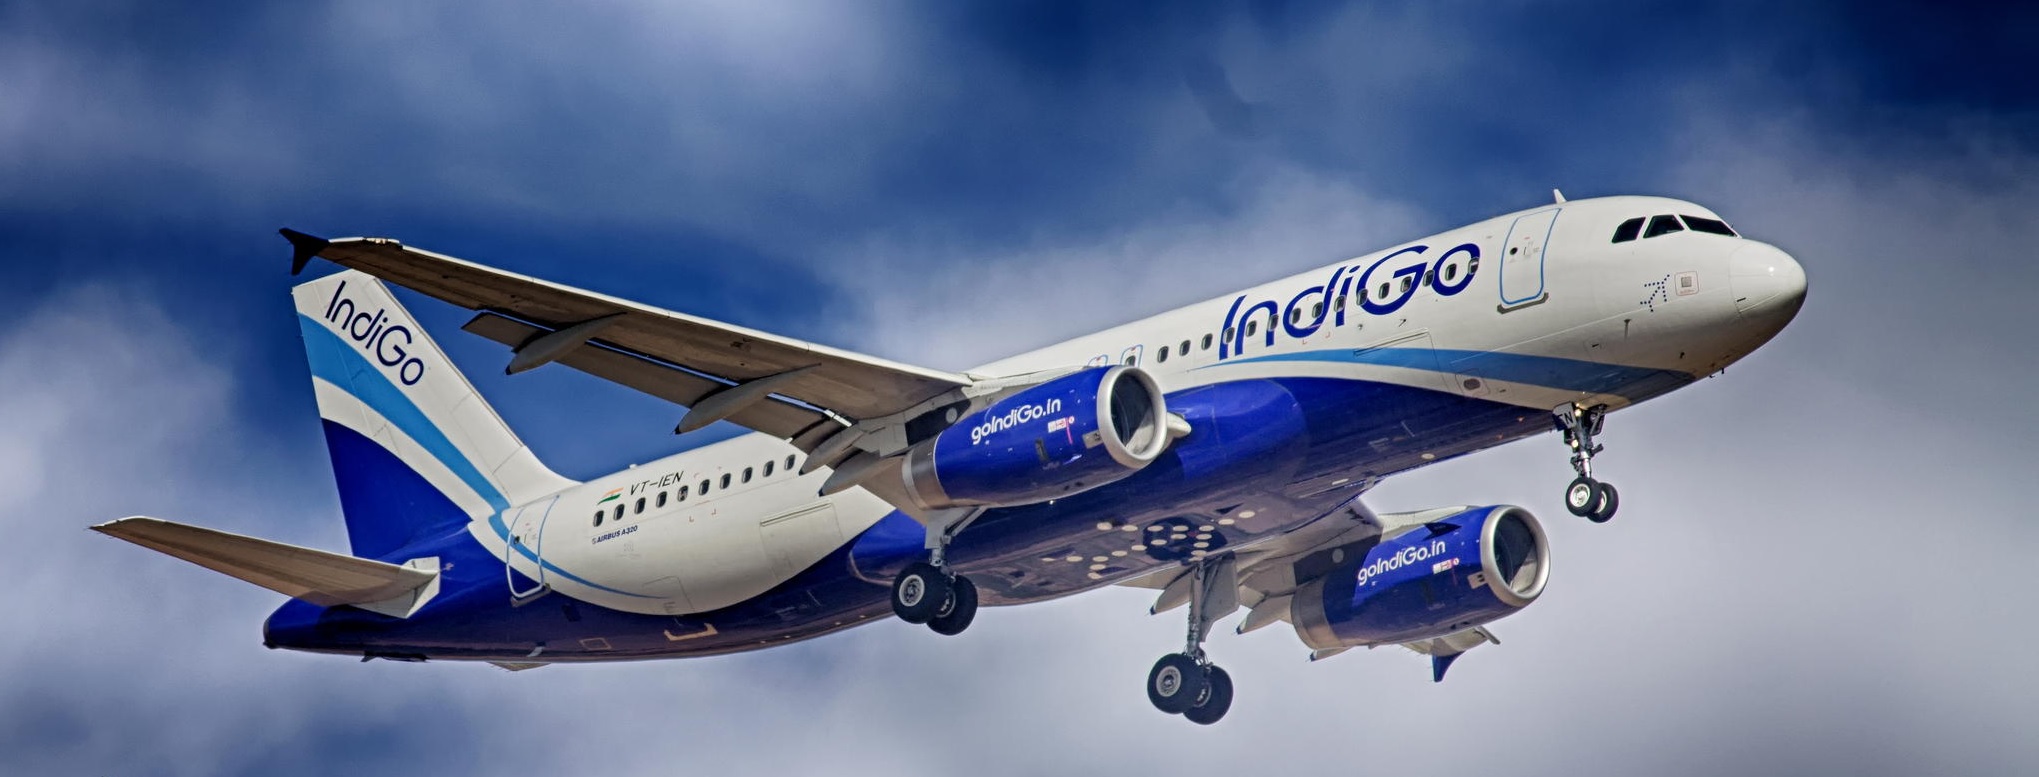 grappling-with-shortage-of-pilots-indigo-cancels-130-flights-on-friday-the-indian-wire